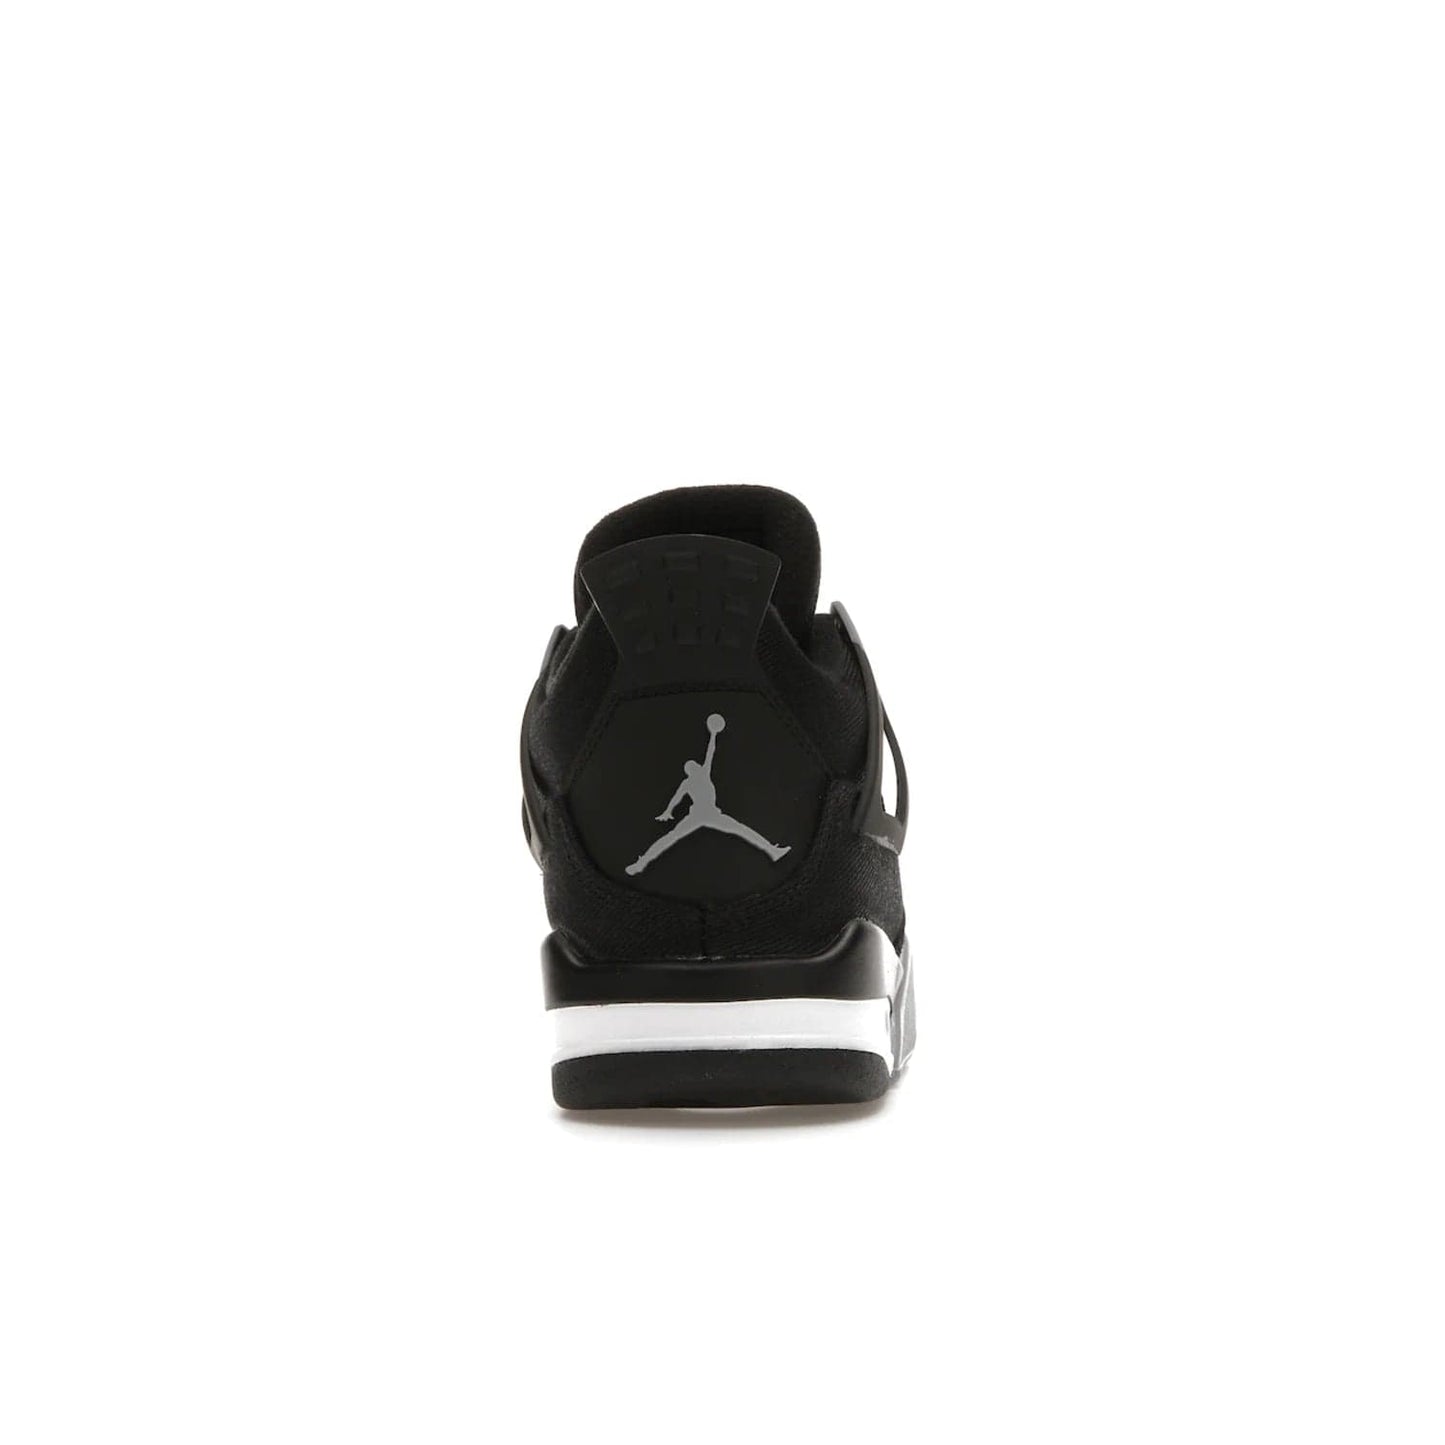 Jordan 4 Retro Black Canvas (GS) - Image 28 - Only at www.BallersClubKickz.com - Premium Air Jordan 4 Retro Black Canvas in grade-schooler's catalog. Featuring black suede canvas upper, grey molding, accents in red, white midsole, woven Jumpman tag, & visible AIR cushioning. Releasing Oct. 1, 2022.